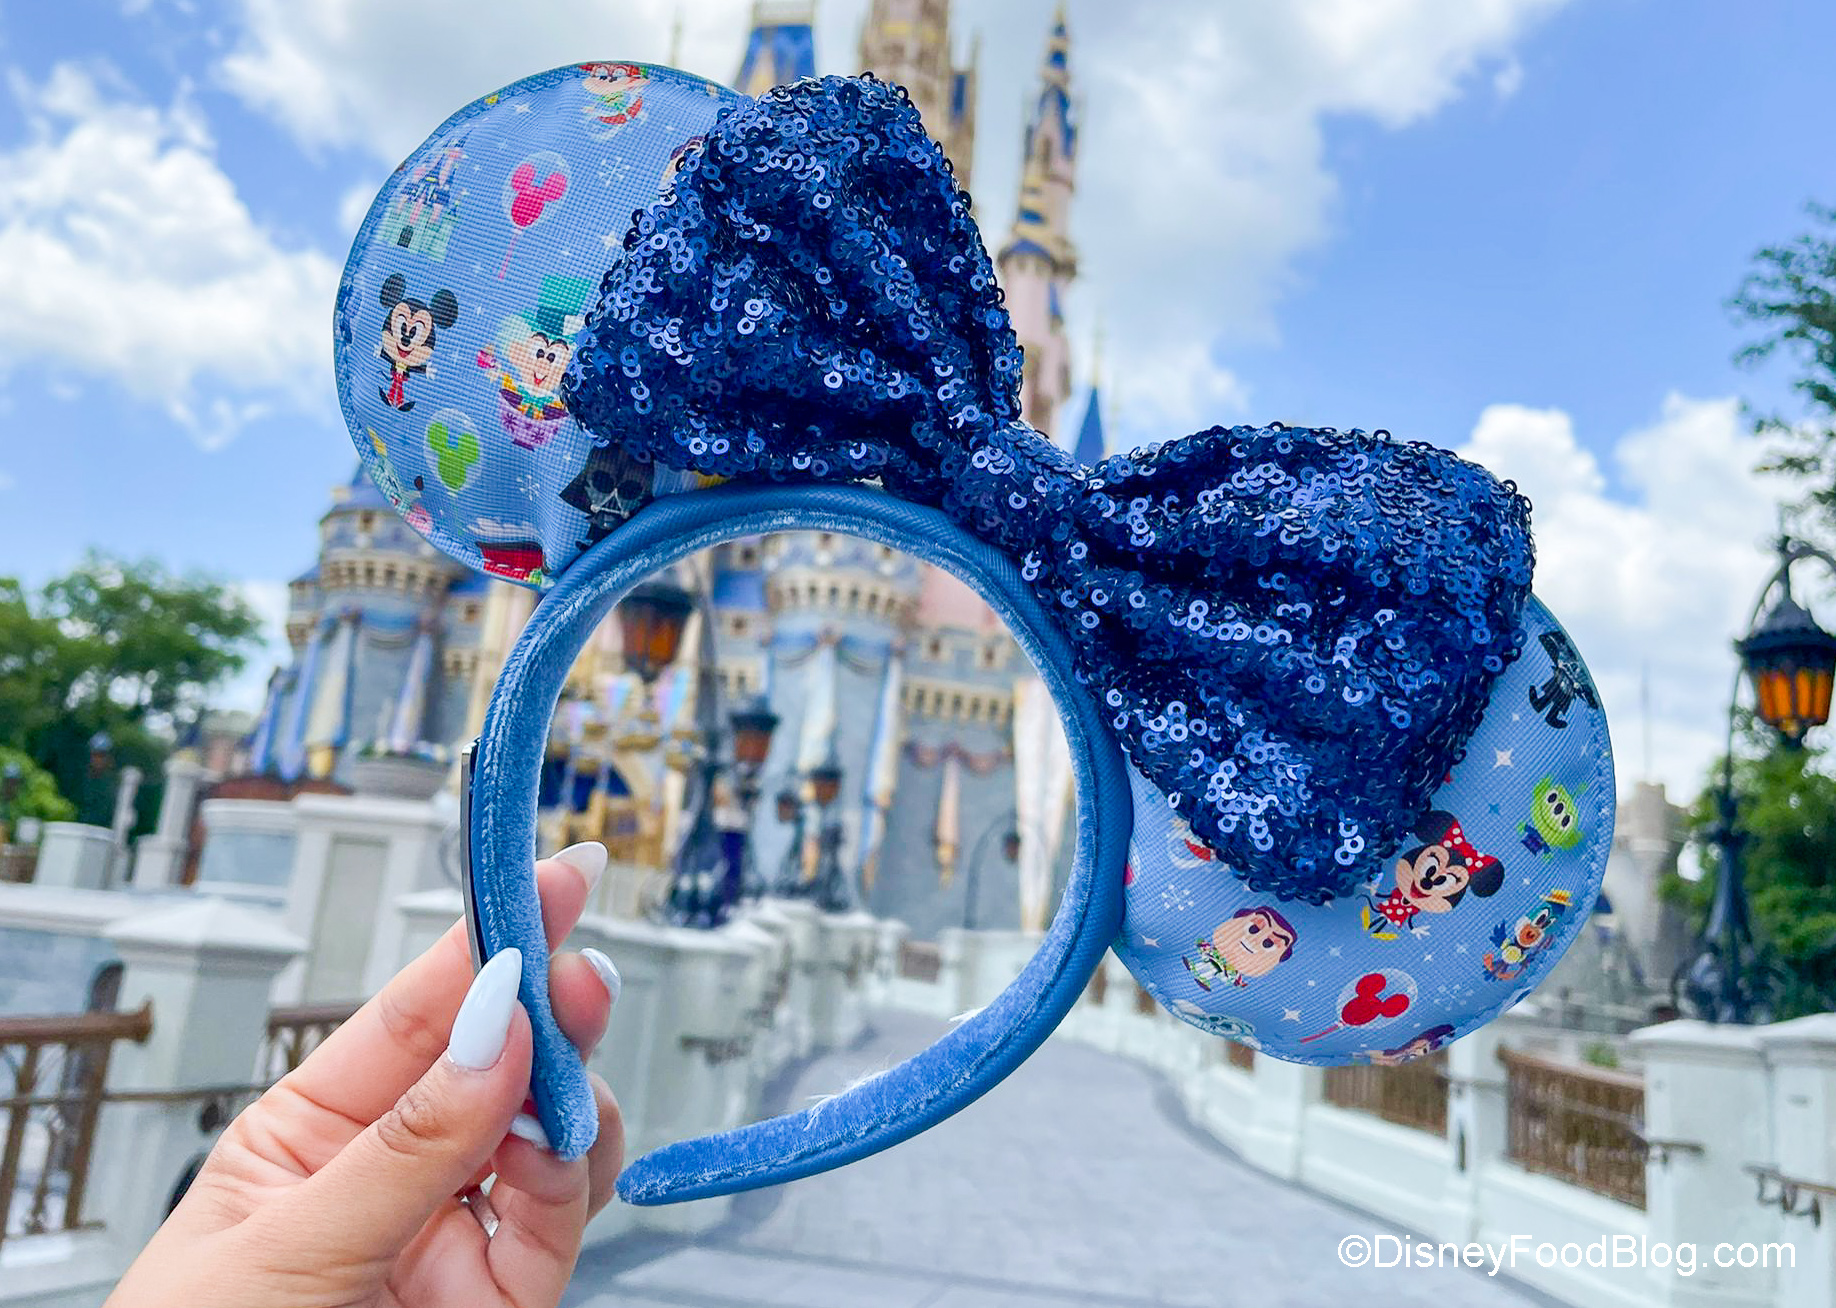 photos-can-you-name-all-the-characters-on-disney-world-s-new-ears